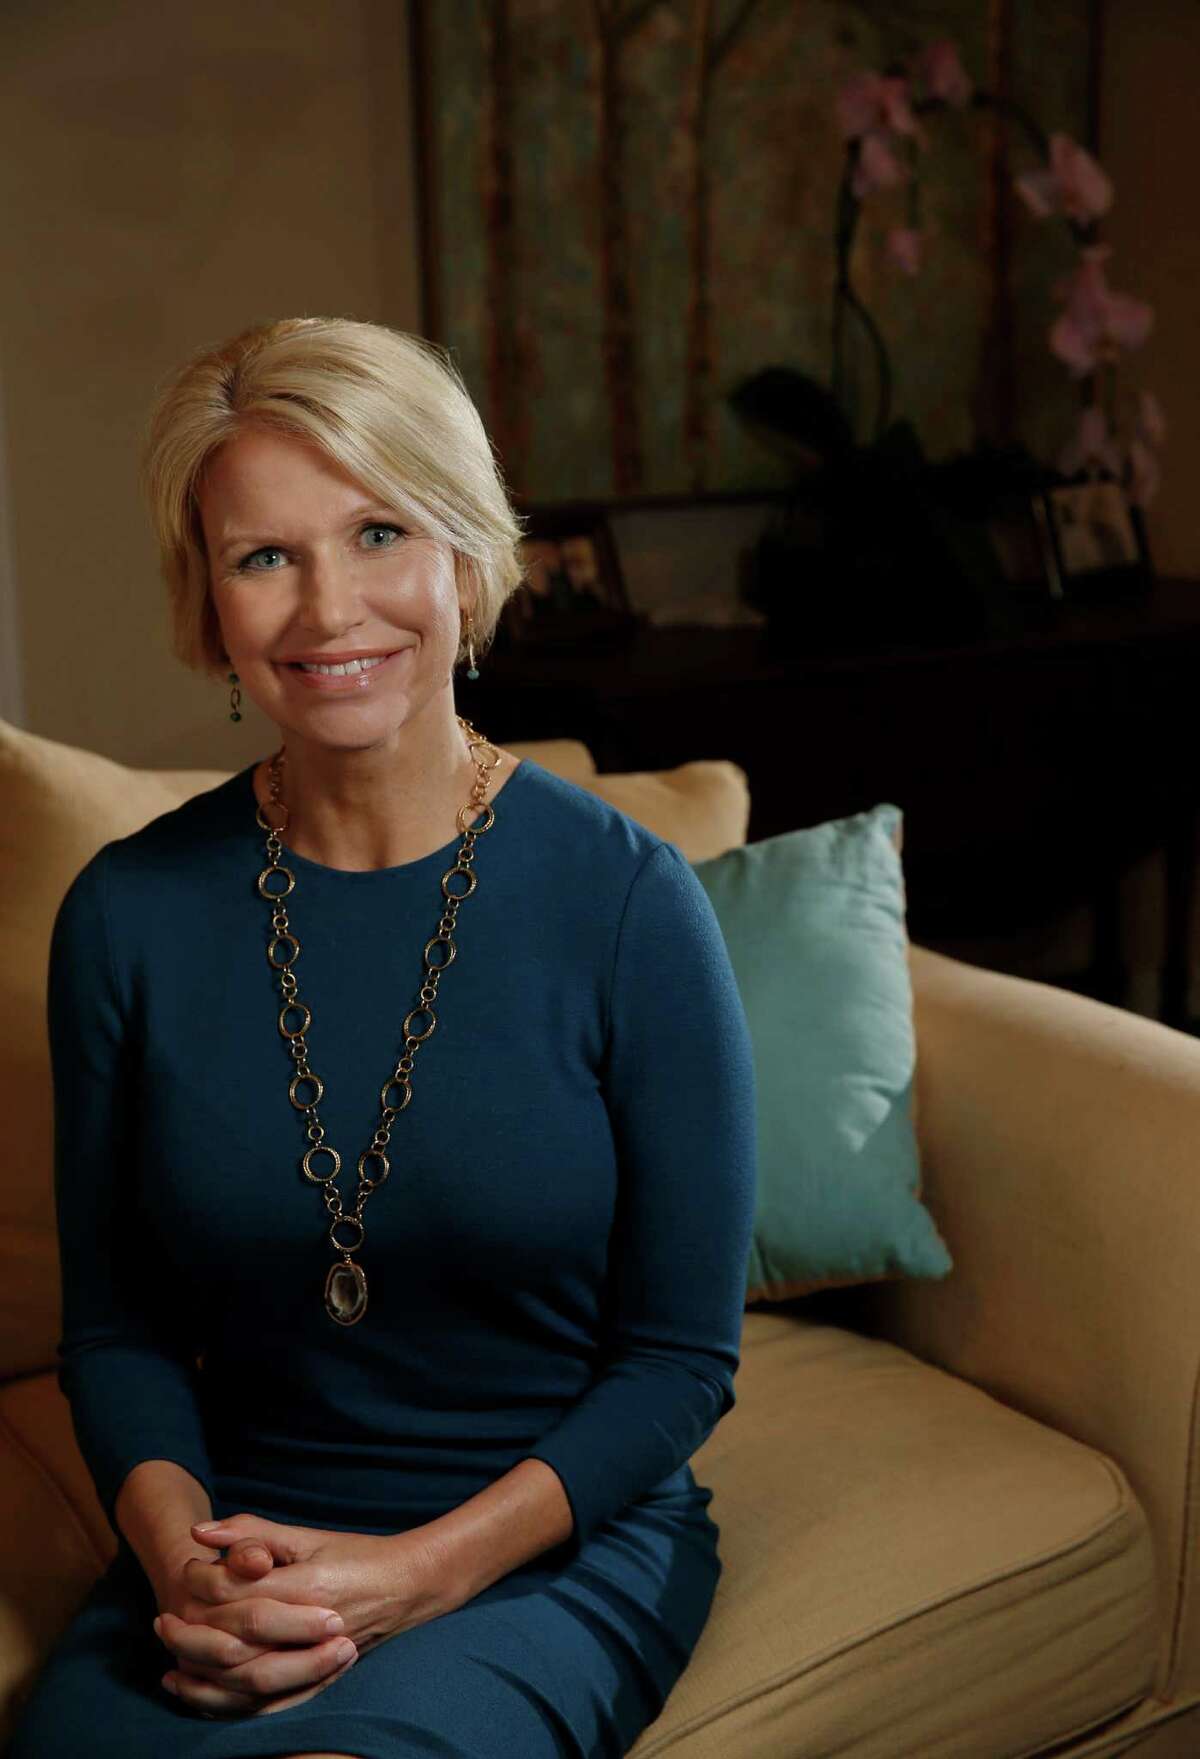 Susan Hawk reappeared in public Wednesday in Dallas after a secret two-month stay at the Menninger Clinic in Houston﻿.